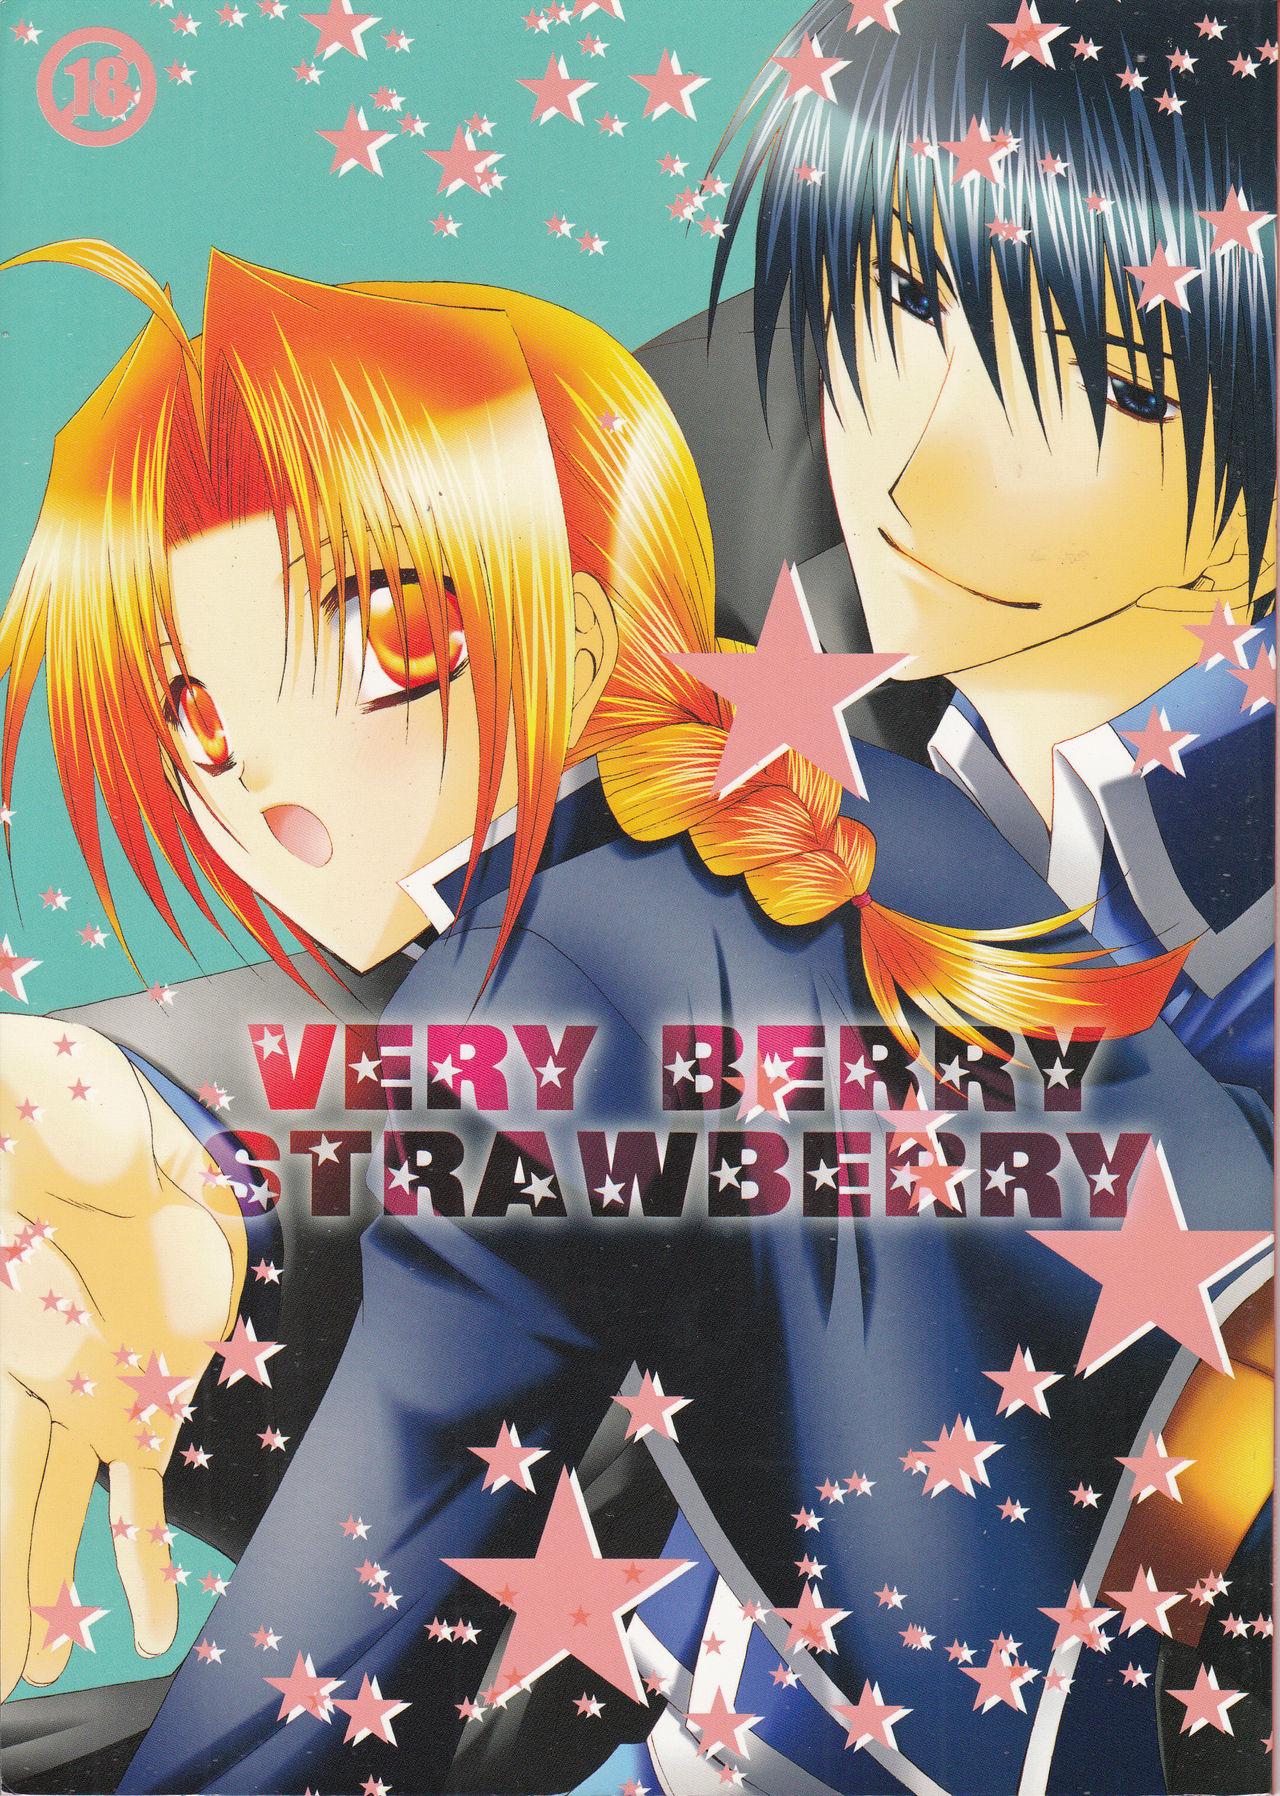 VERY BERRY STRAWBERRY [CLASSIC MILK、PEACE and ALIEN (十七星ふき、朝丘夏生)] (鋼の錬金術師) 0